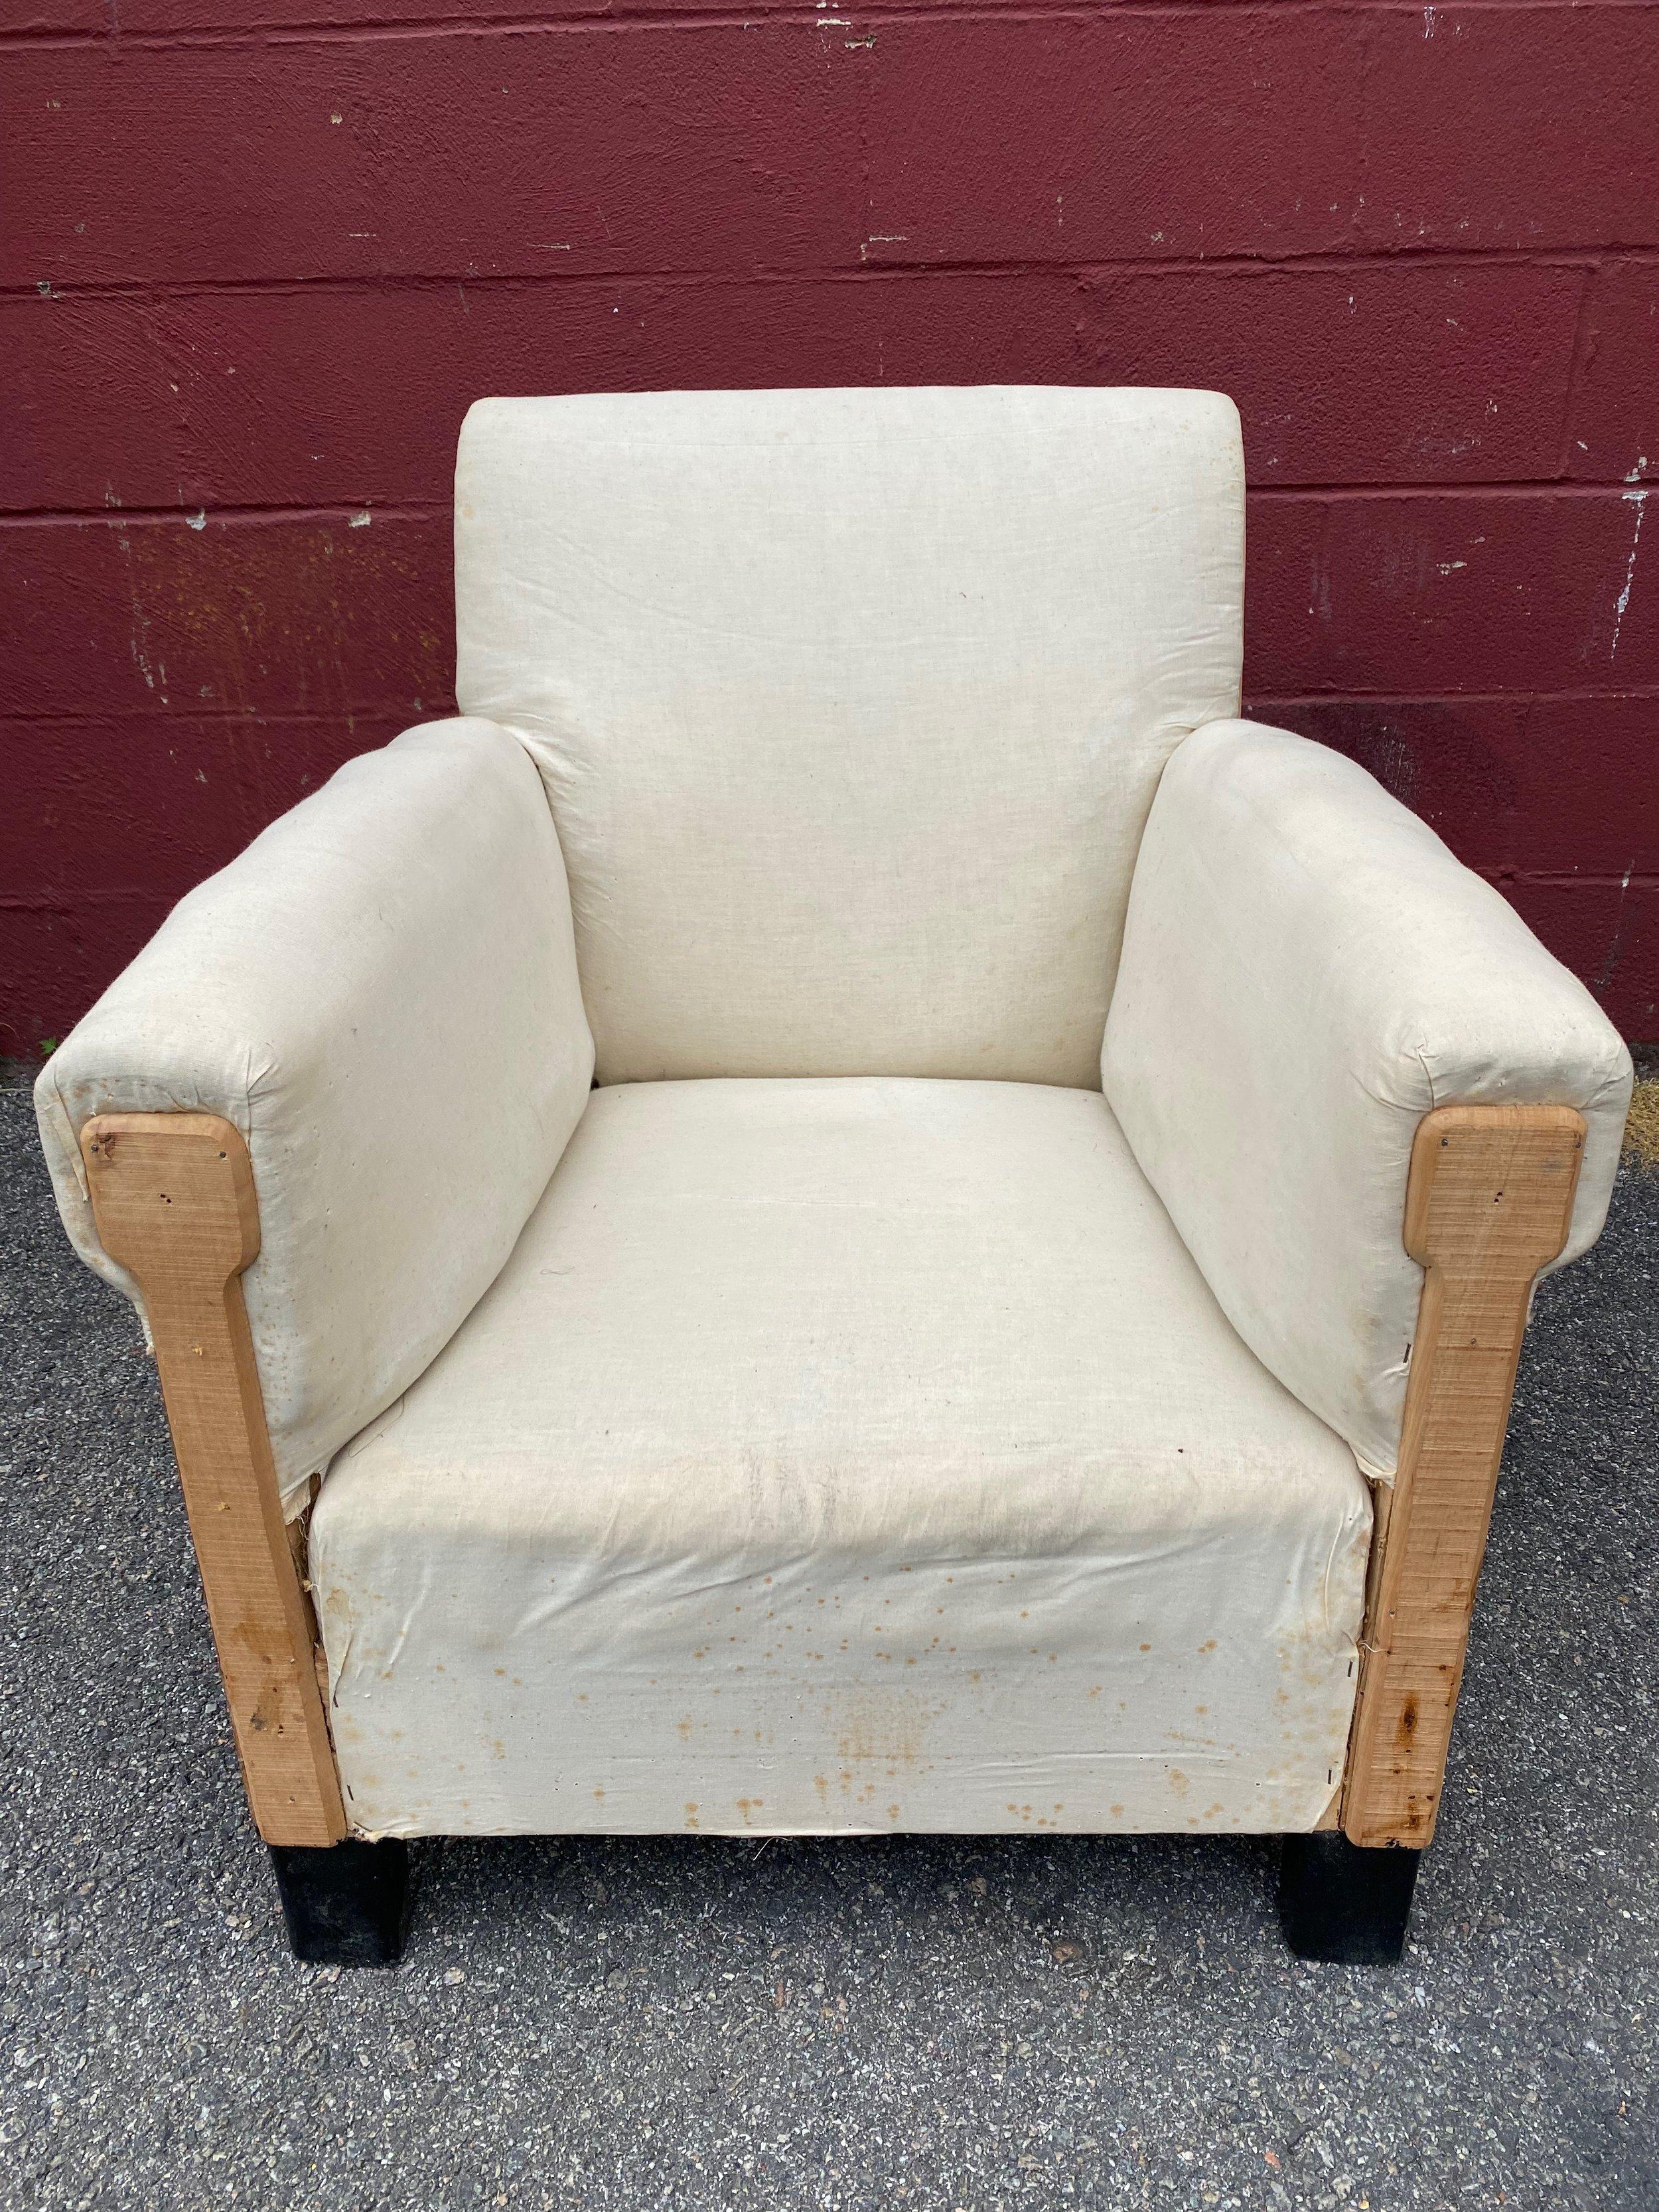 Pair of Small Scale 1950s French Mid Century Modern Club Chairs in Muslin In Good Condition For Sale In Buchanan, NY